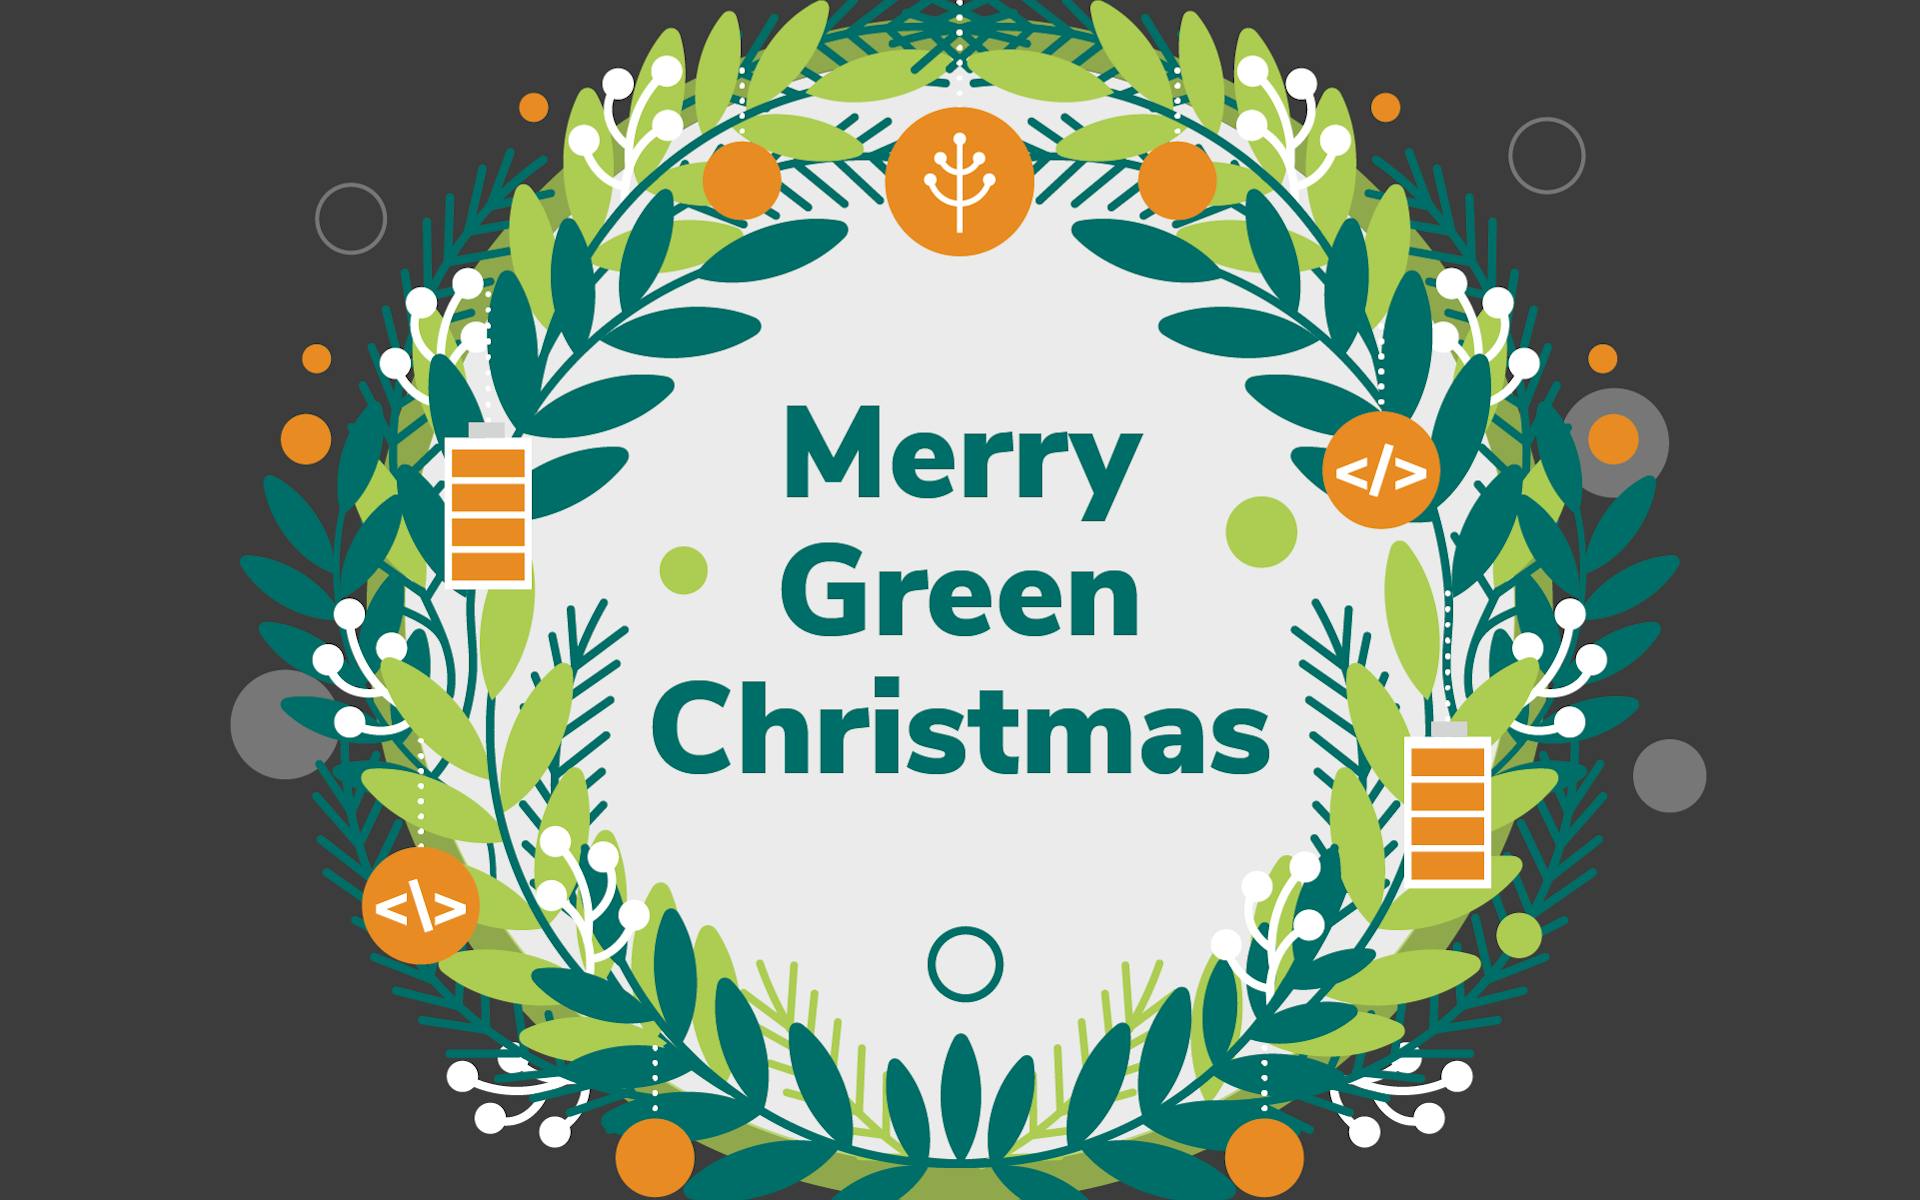 Wishing You A Merry Green Christmas and Happy Holidays!